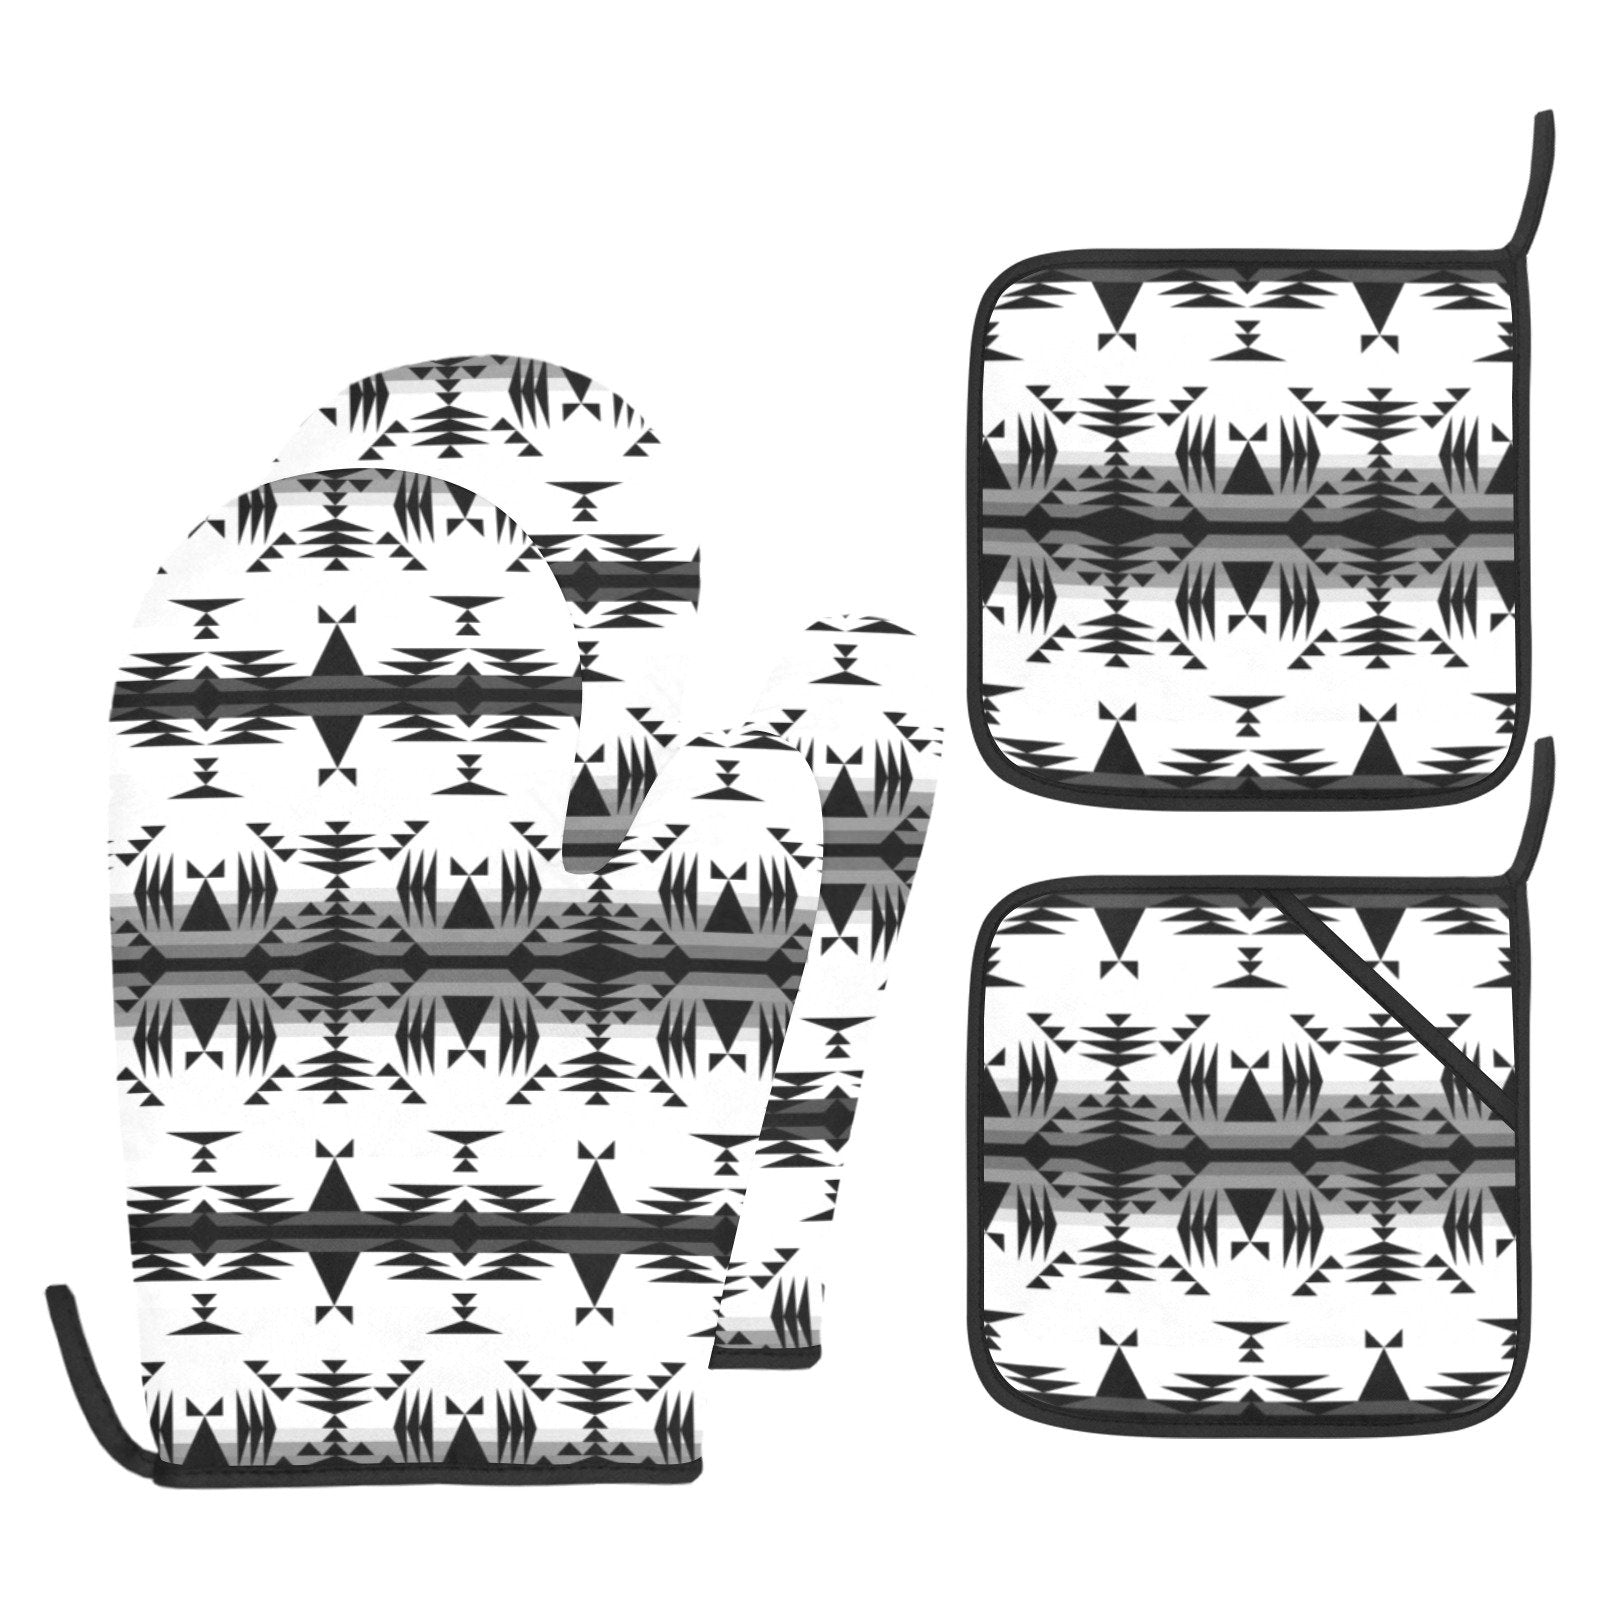 Between the Mountains White and Black Oven Mitt & Pot Holder Oven Mitt & Pot Holder e-joyer 